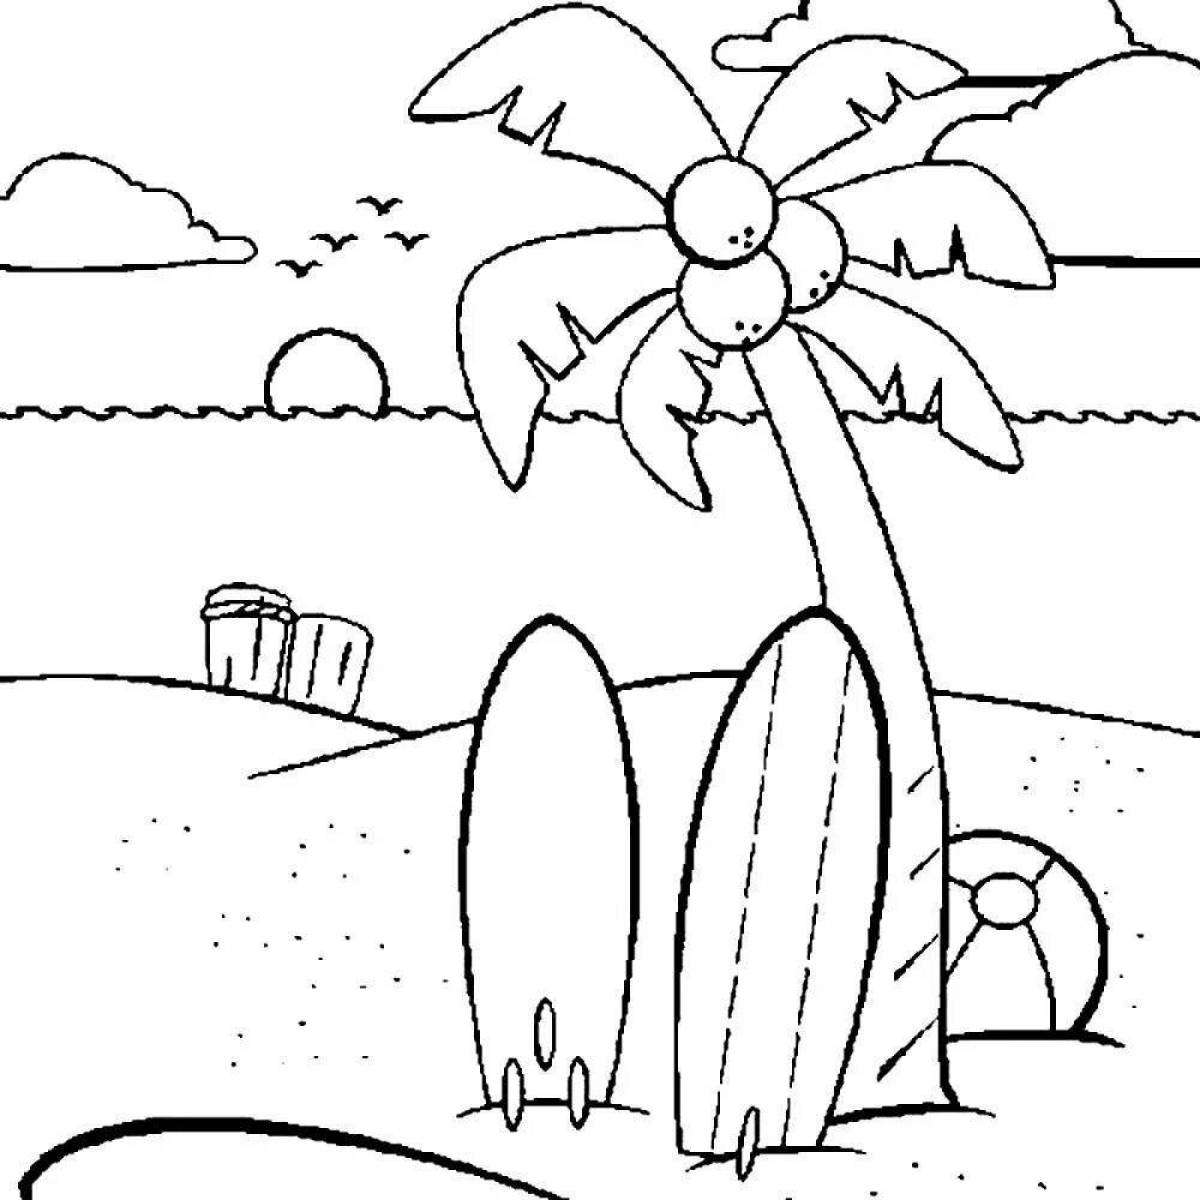 Relaxing sea beach coloring page